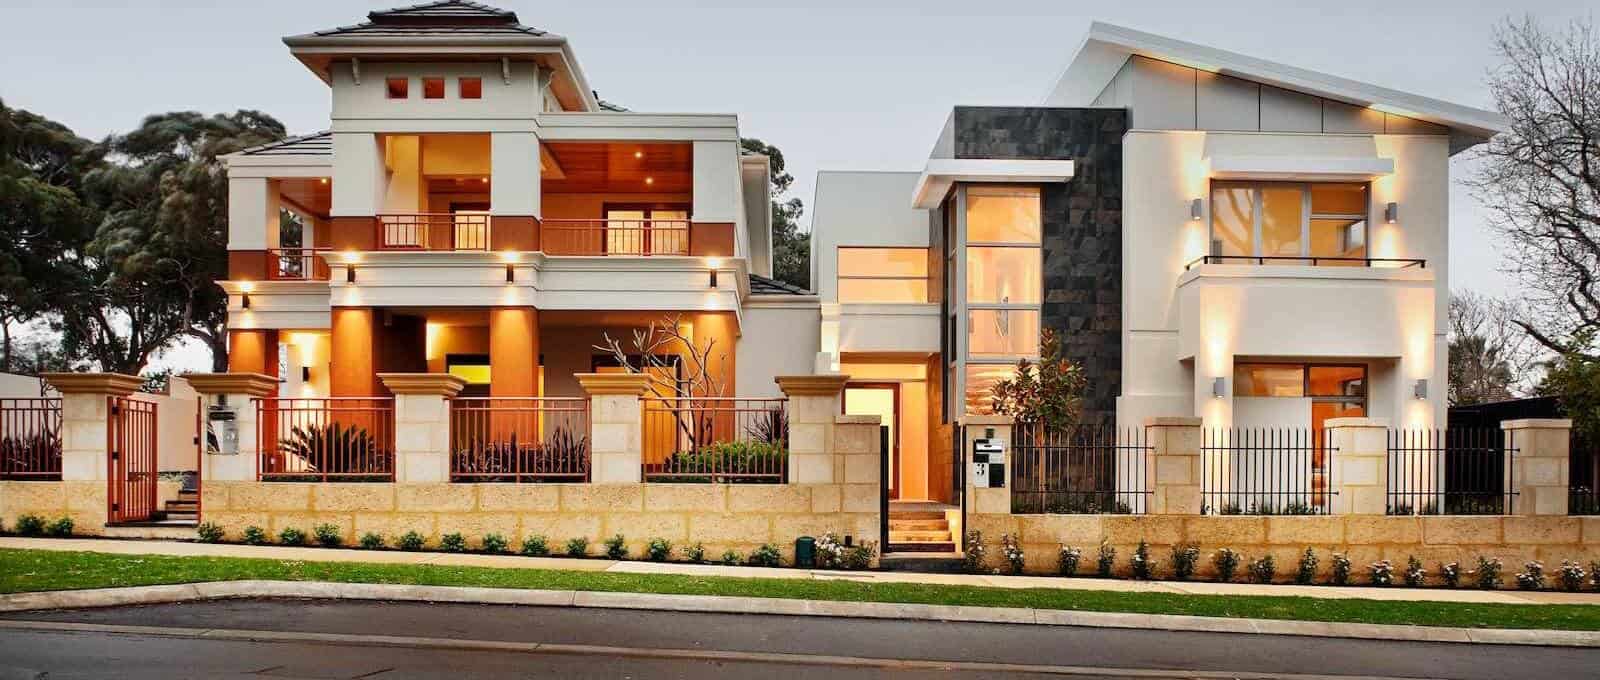 New Luxury Homes In Perth Are On The Rise Exclusive 